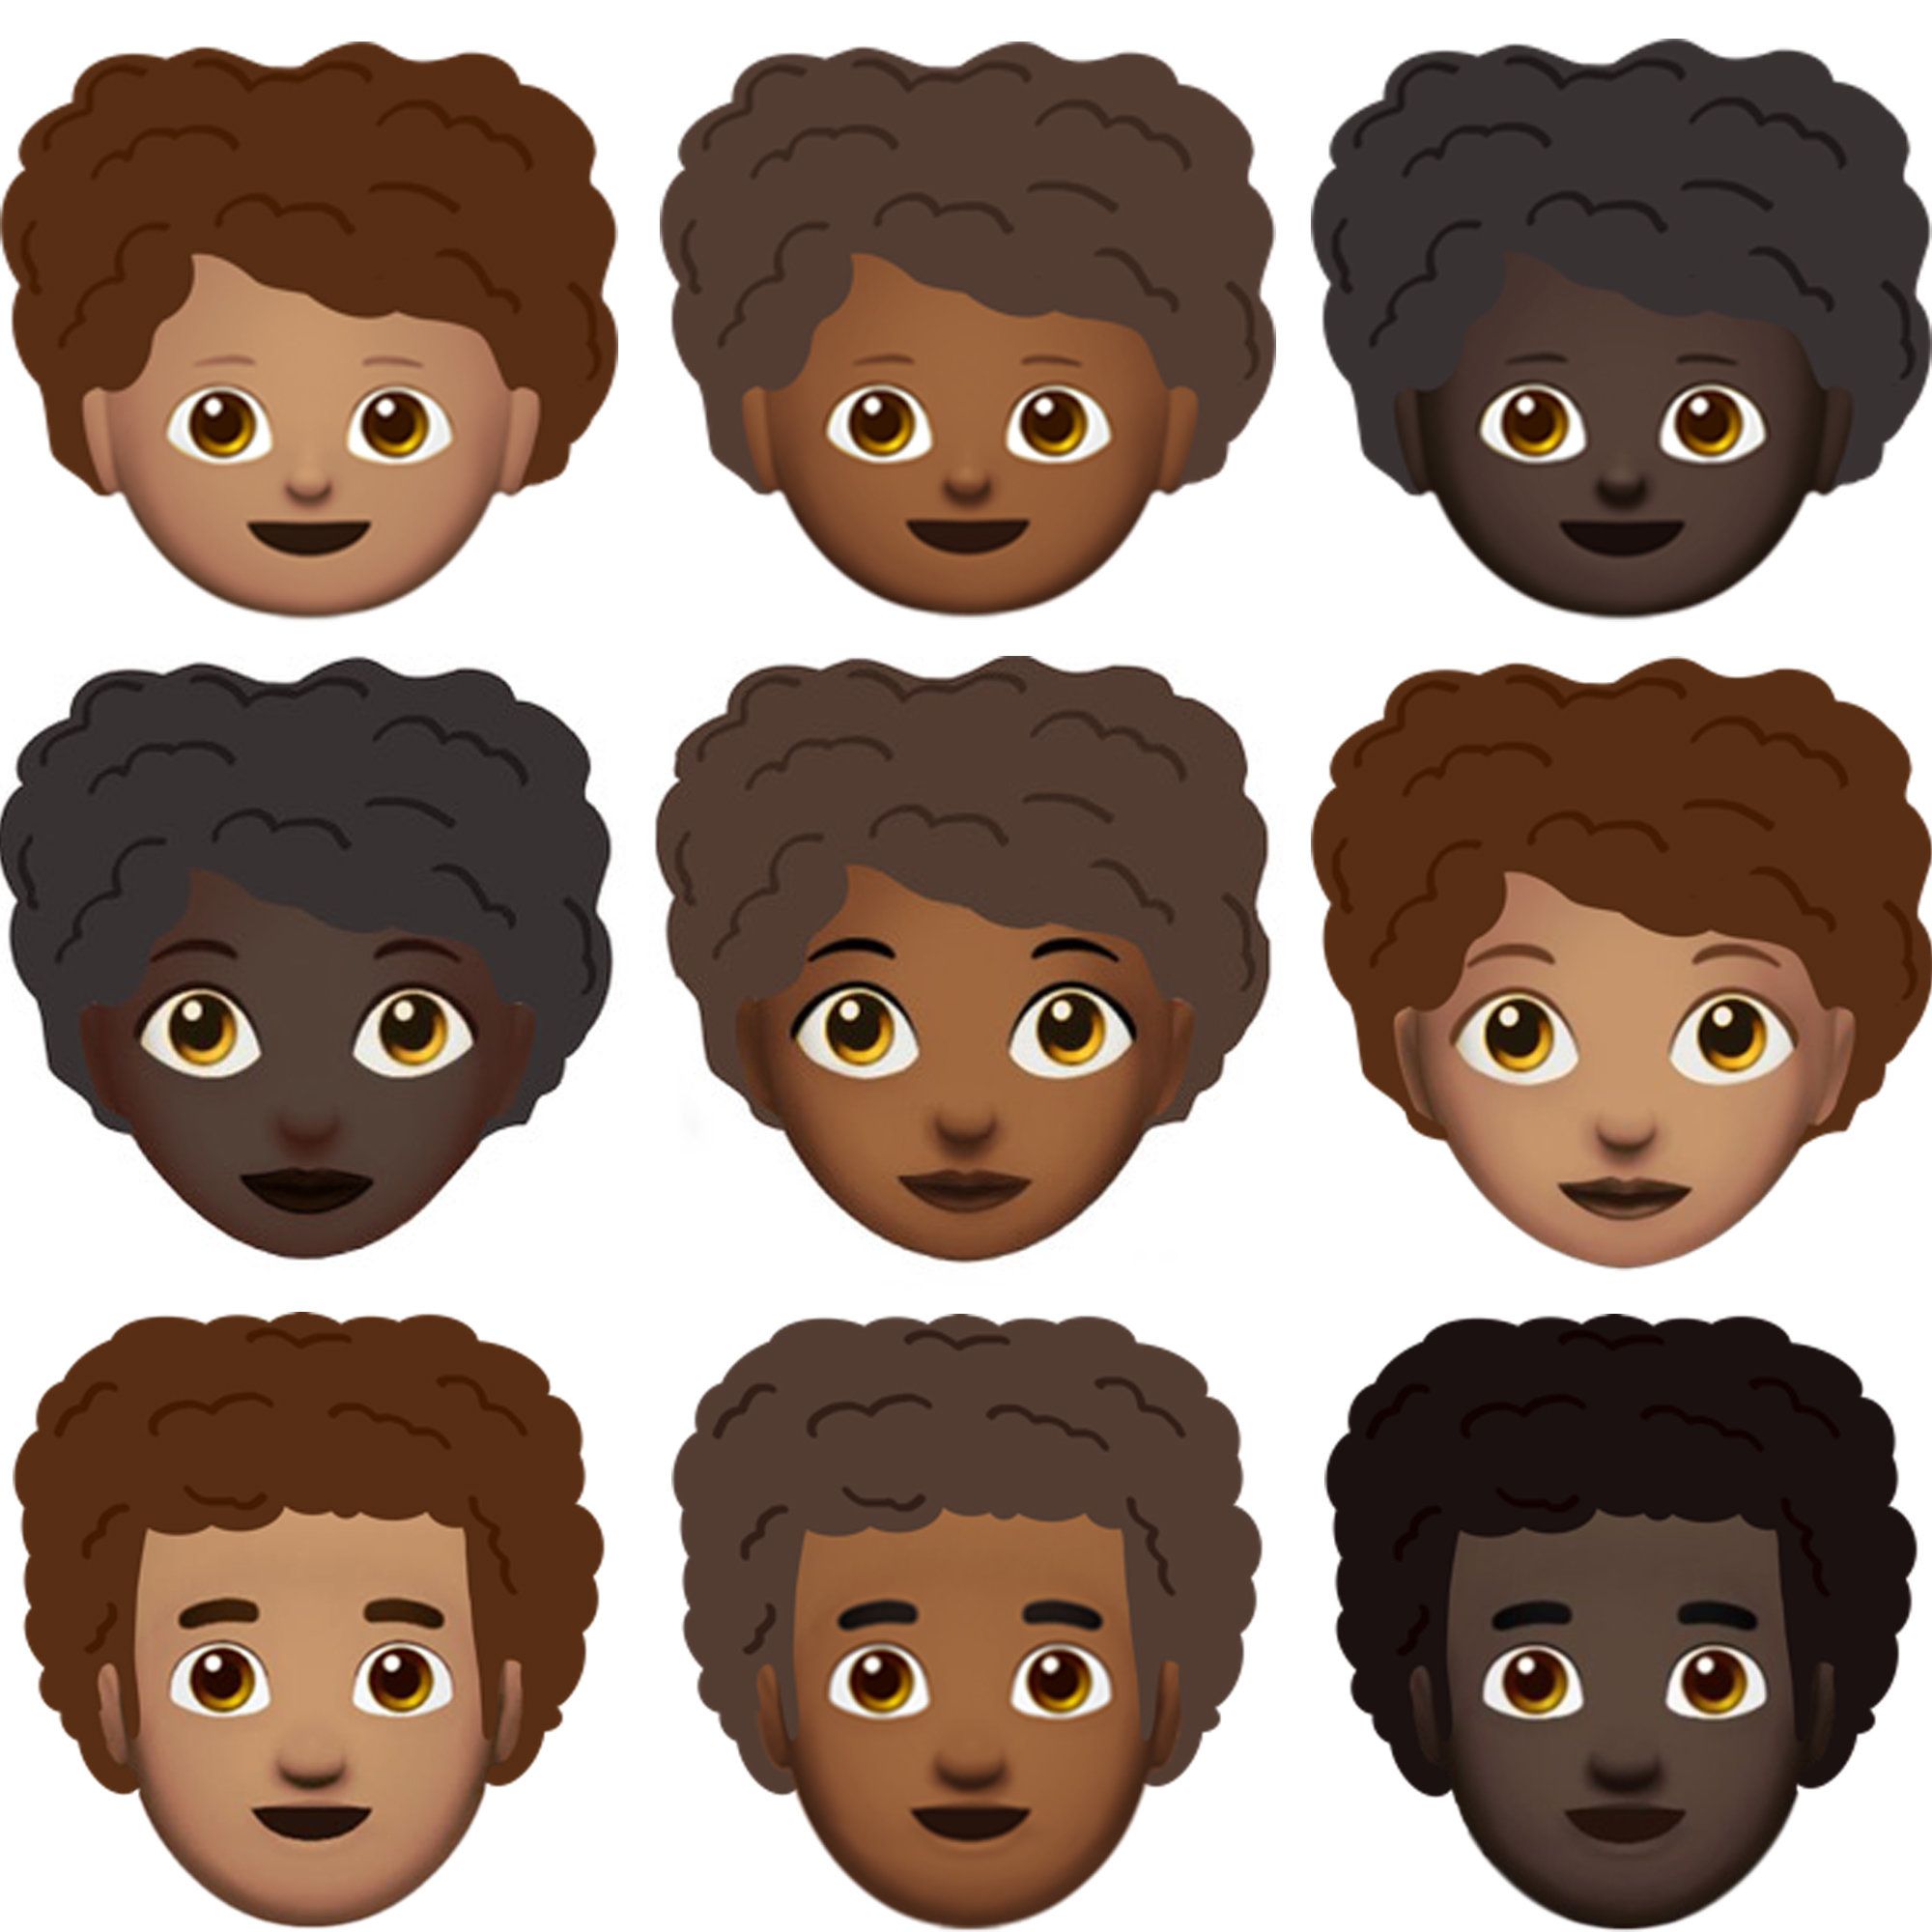 Afro Emojis Don't Exist. These Women Want to Change That